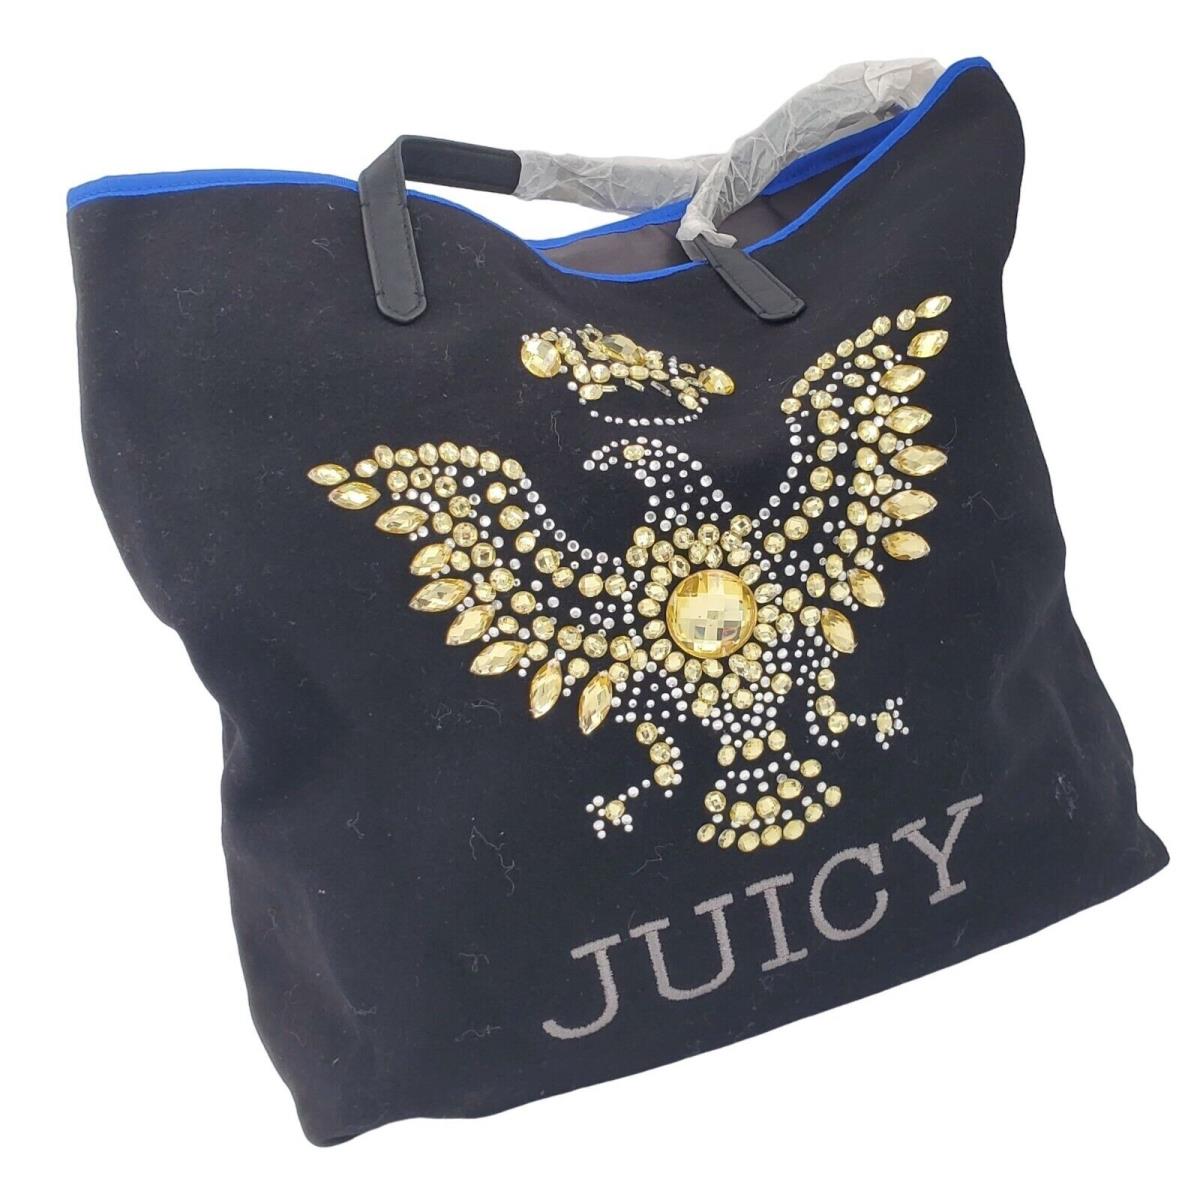 Vintage Juicy Couture Baby Bag for Sale in Philadelphia, PA - OfferUp